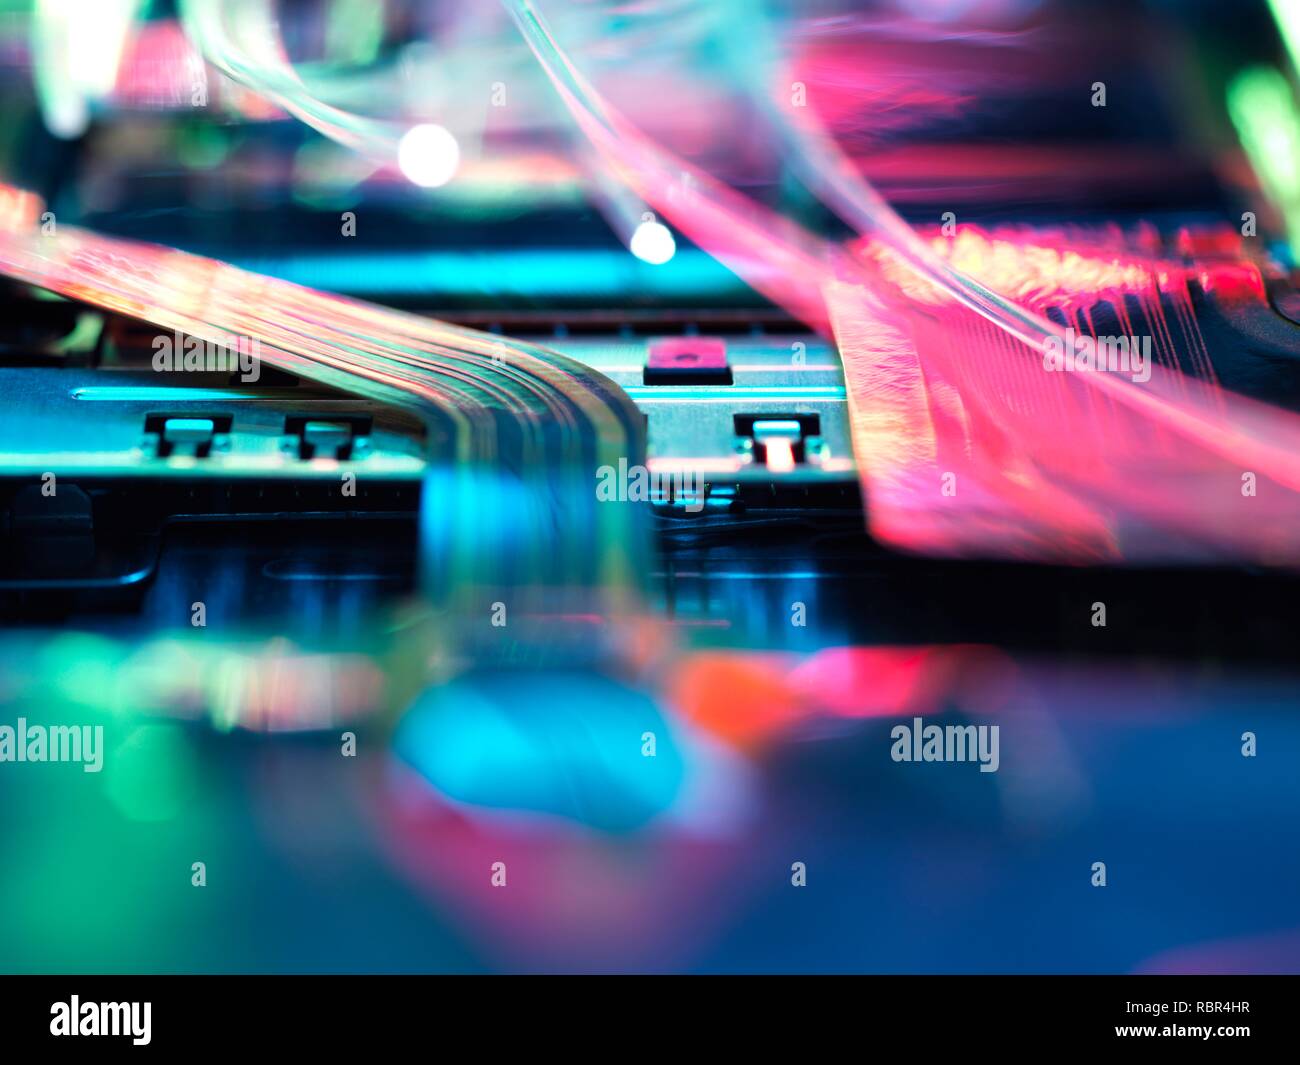 Fibre optics carrying data over electronic circuitry on a laptop computer. Stock Photo